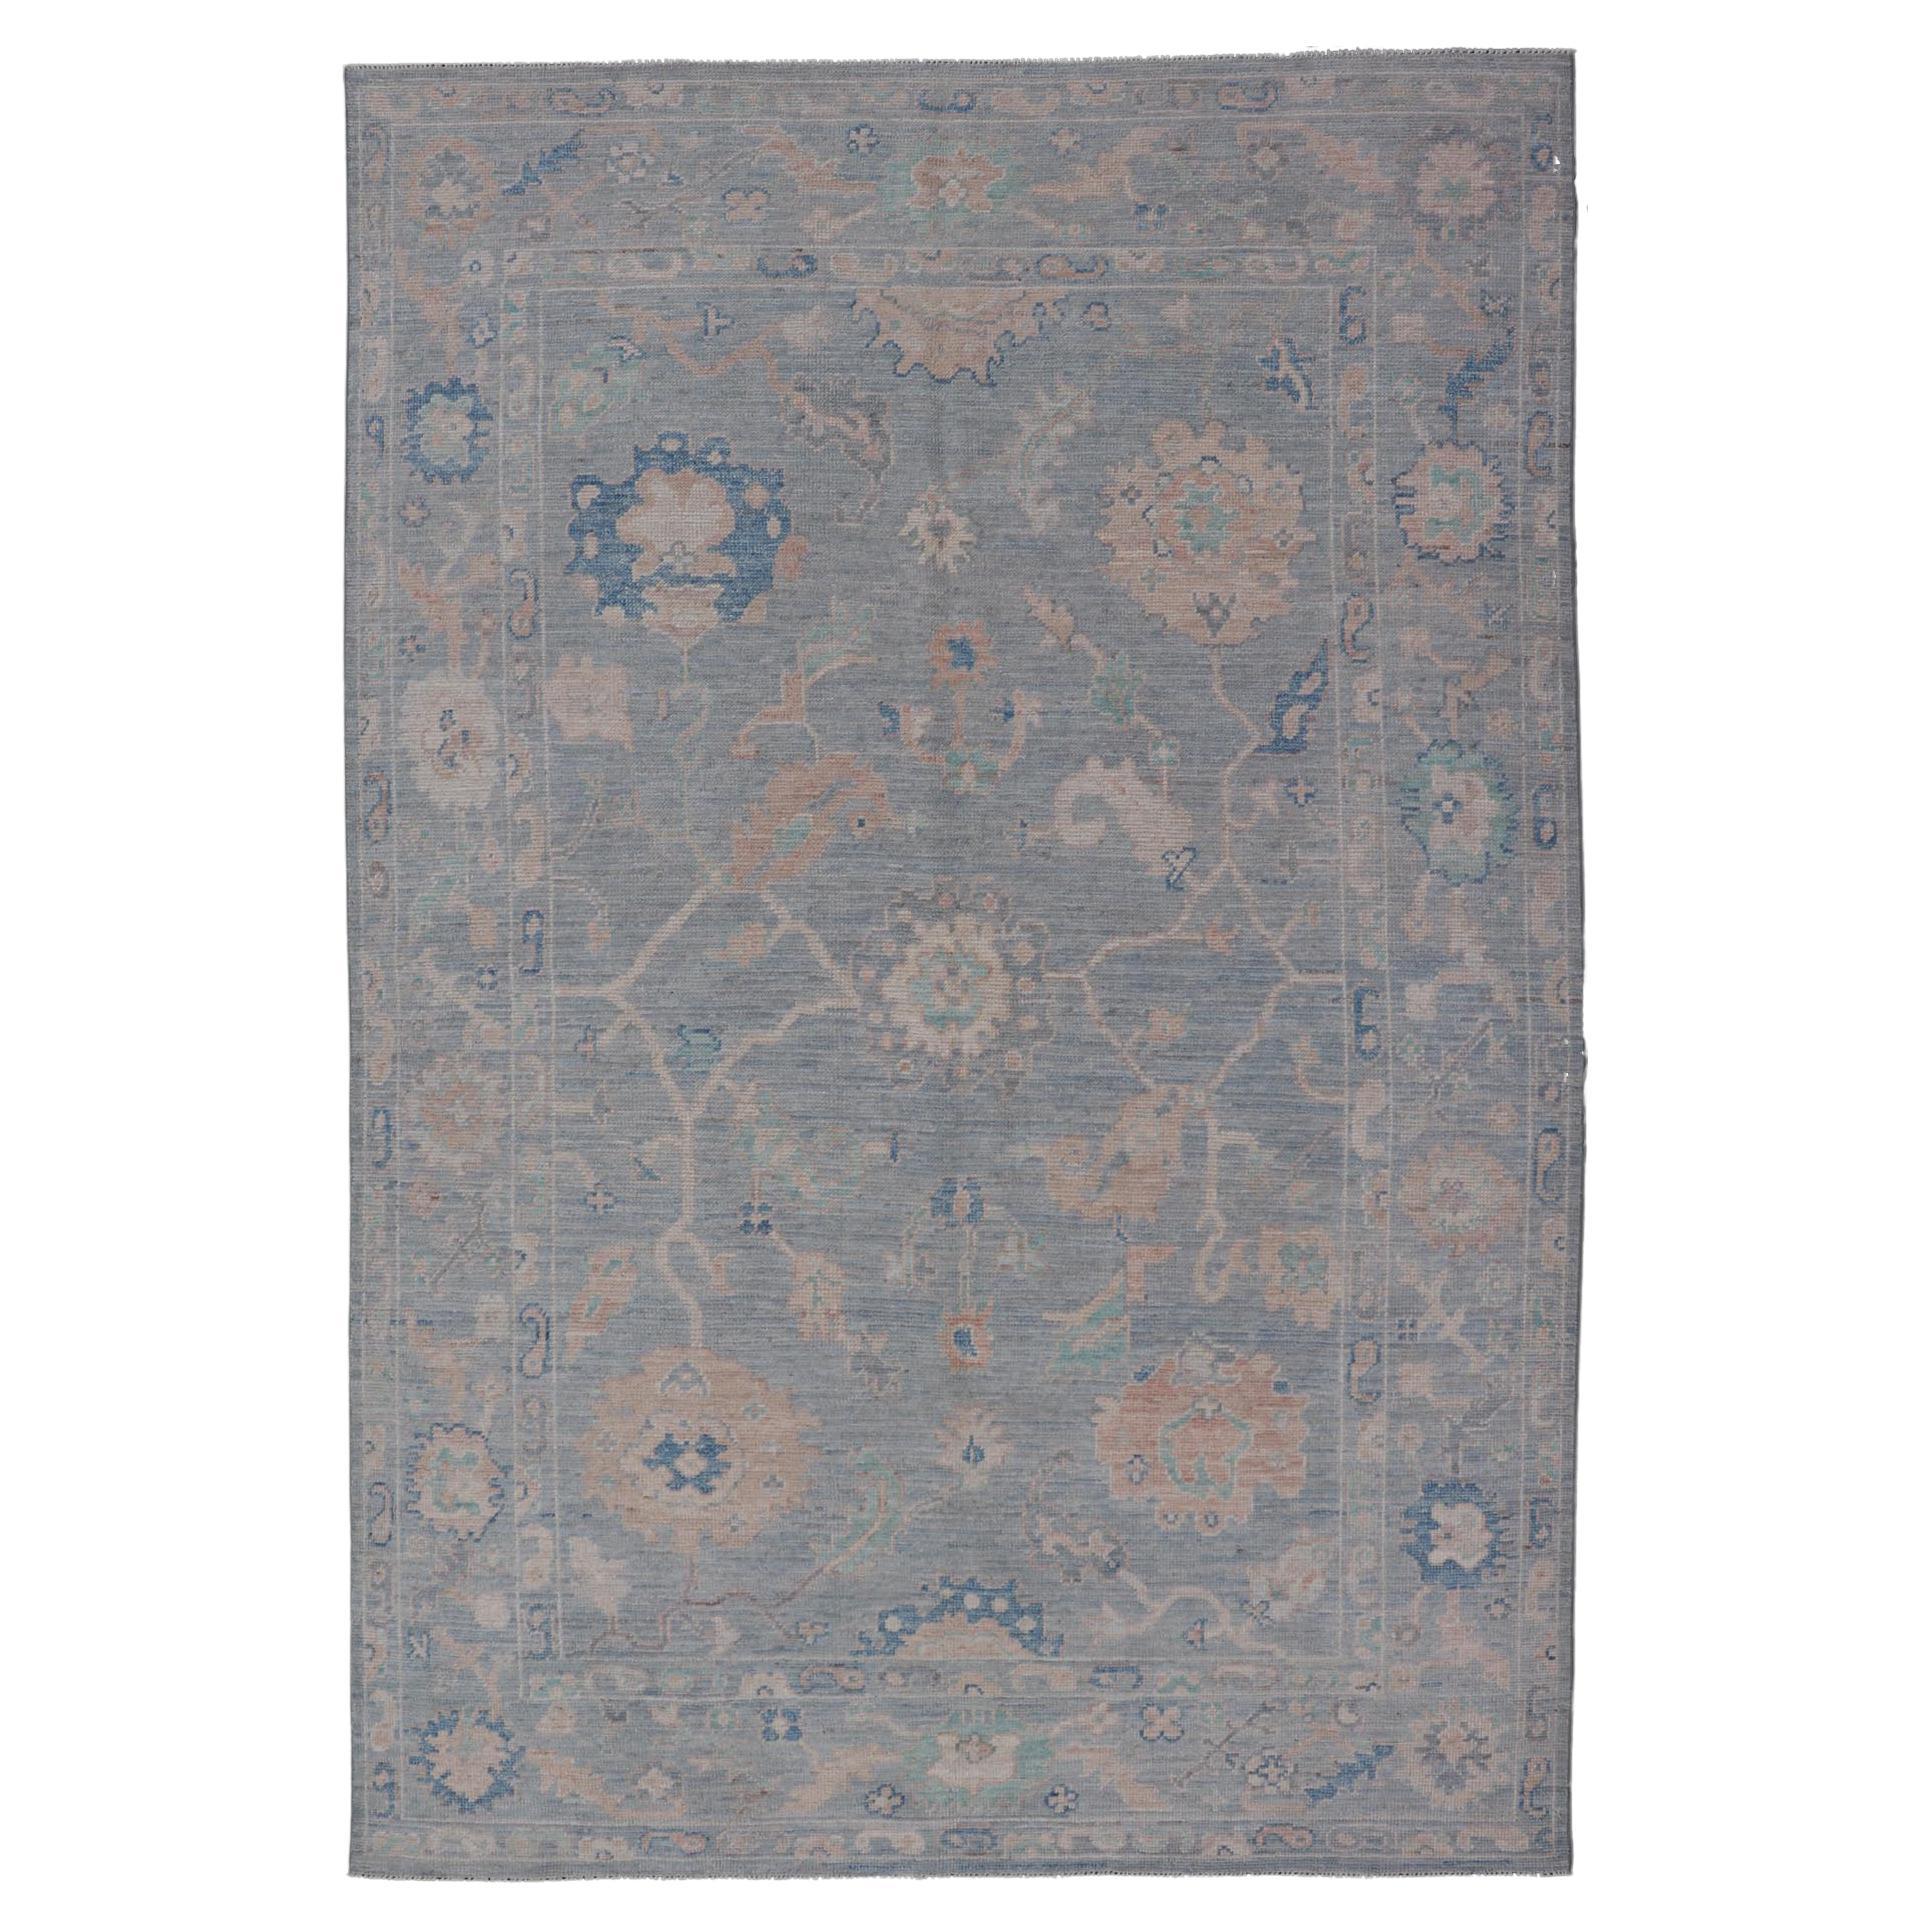 Modern Oushak Rug With in Light Gray Blue Background and All-Over Floral Motifs